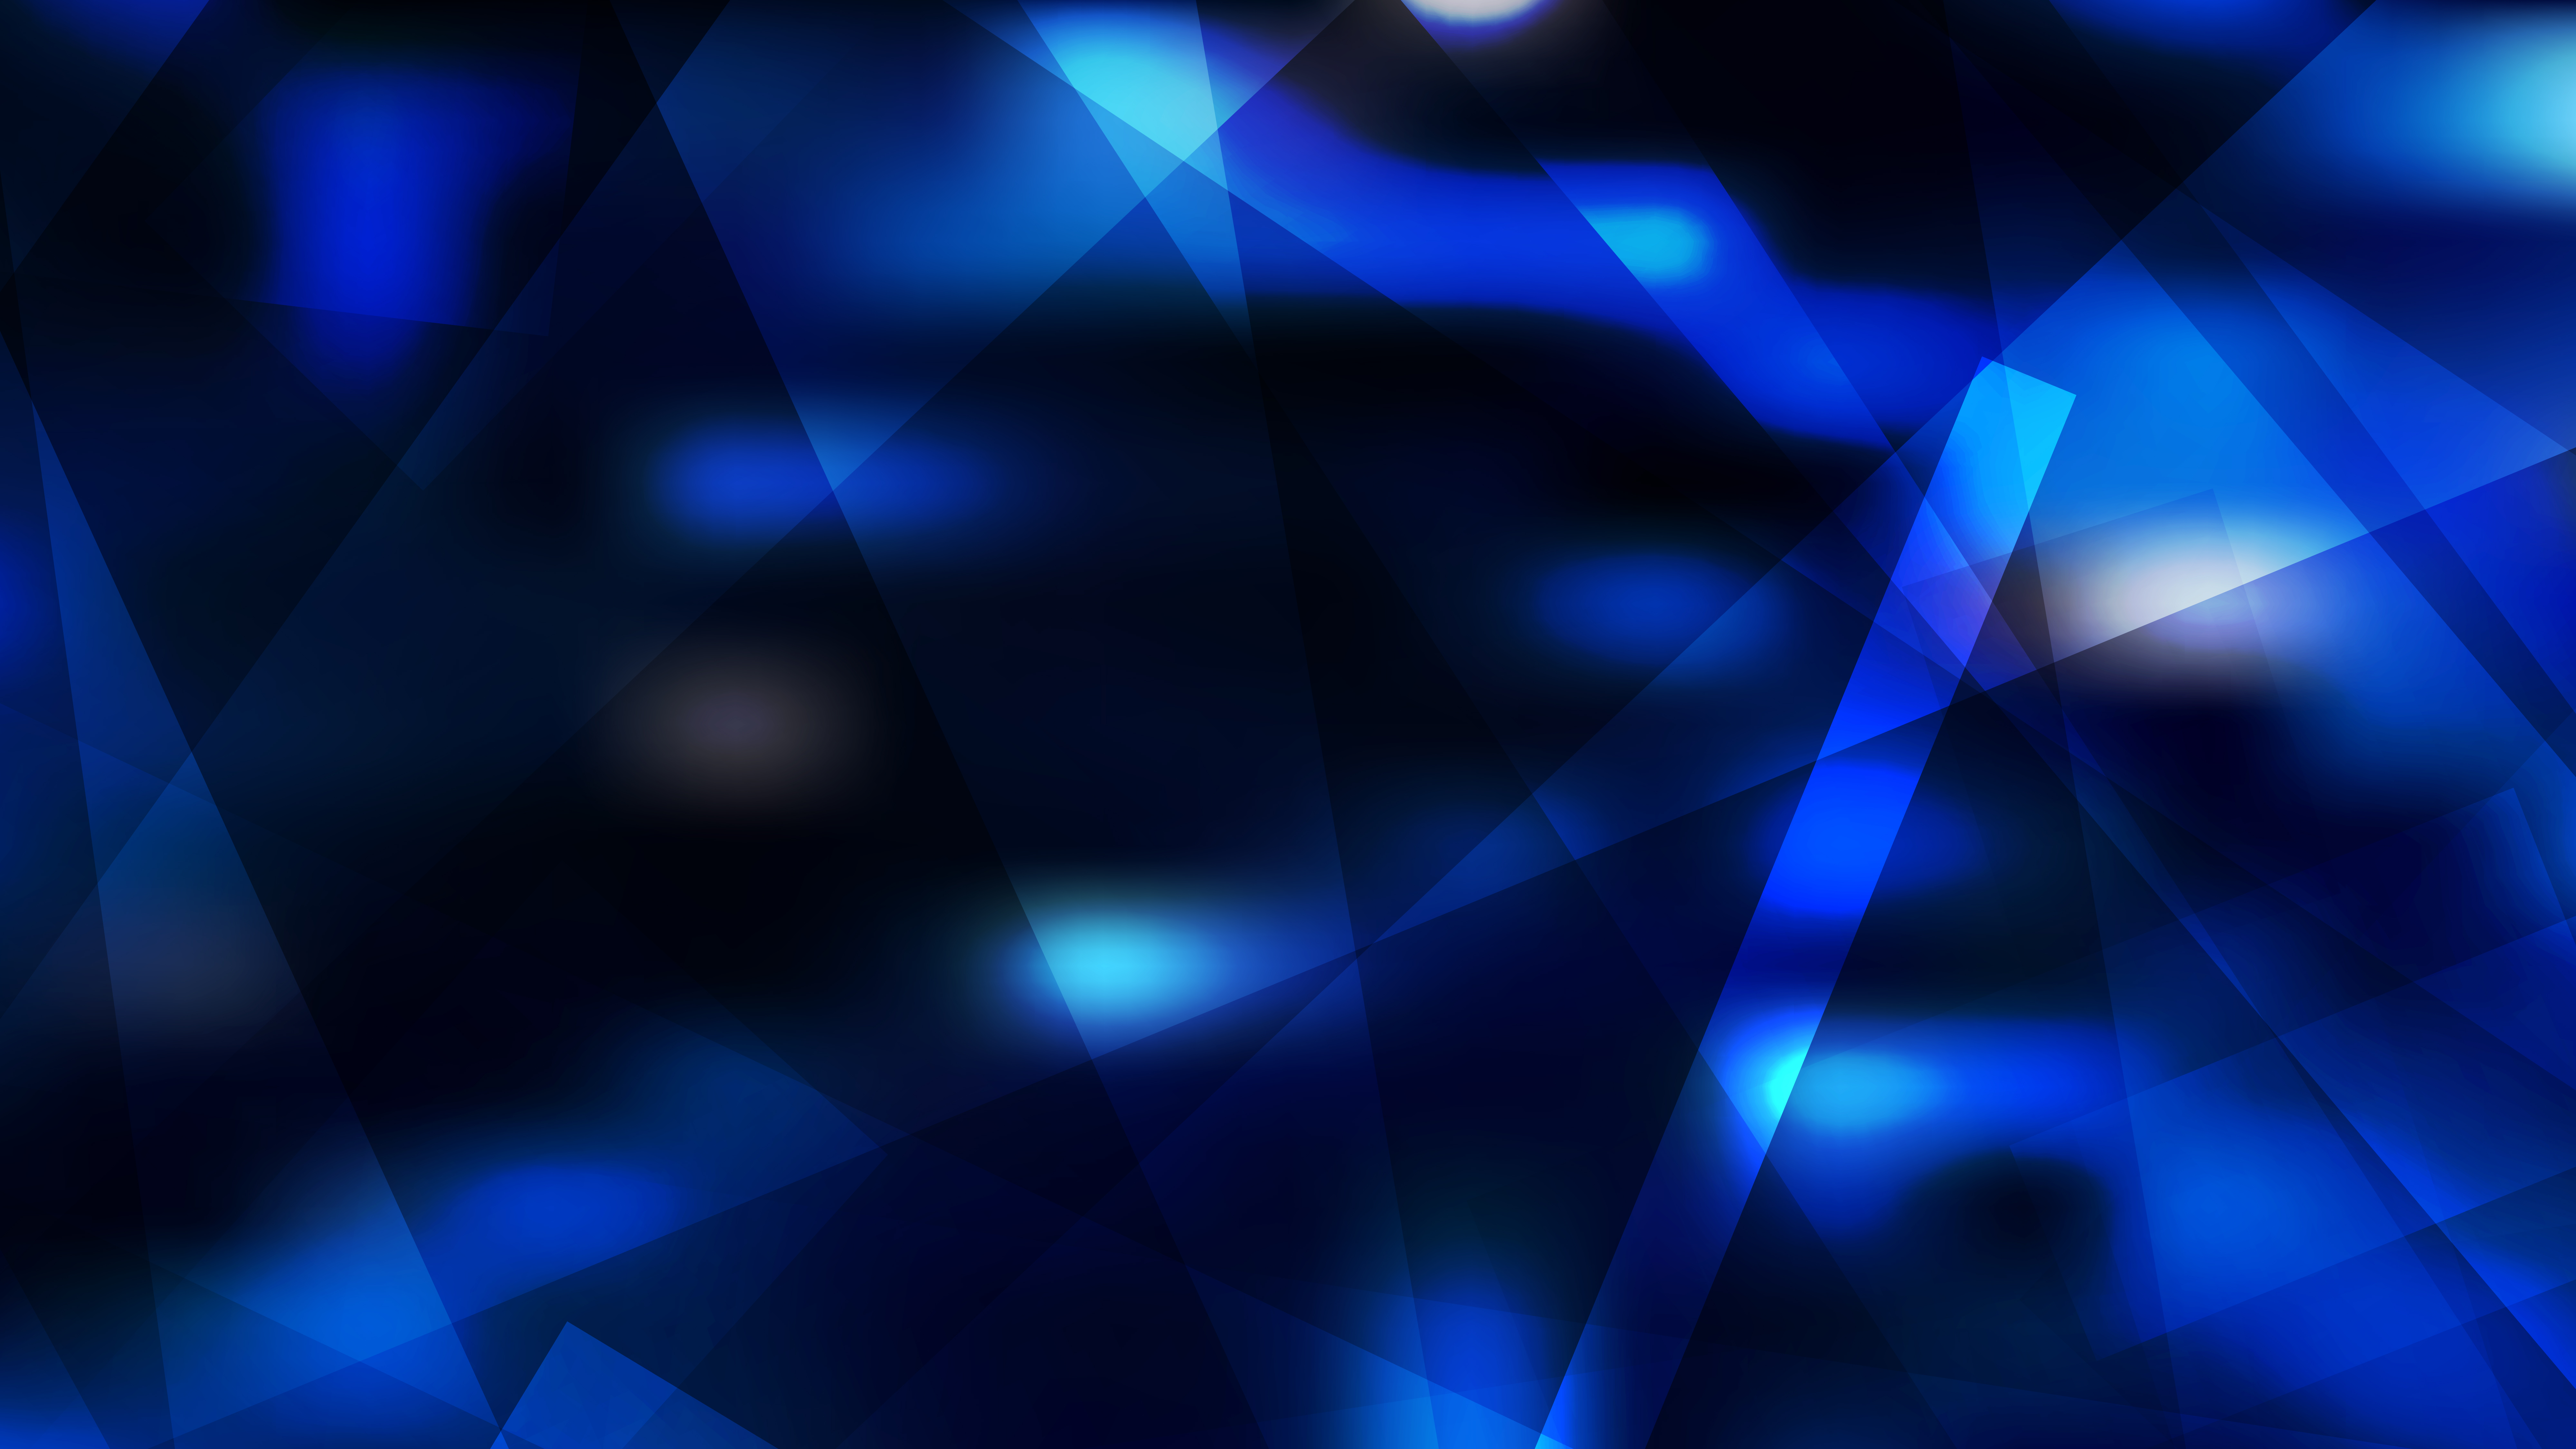 cool blue abstract backgrounds